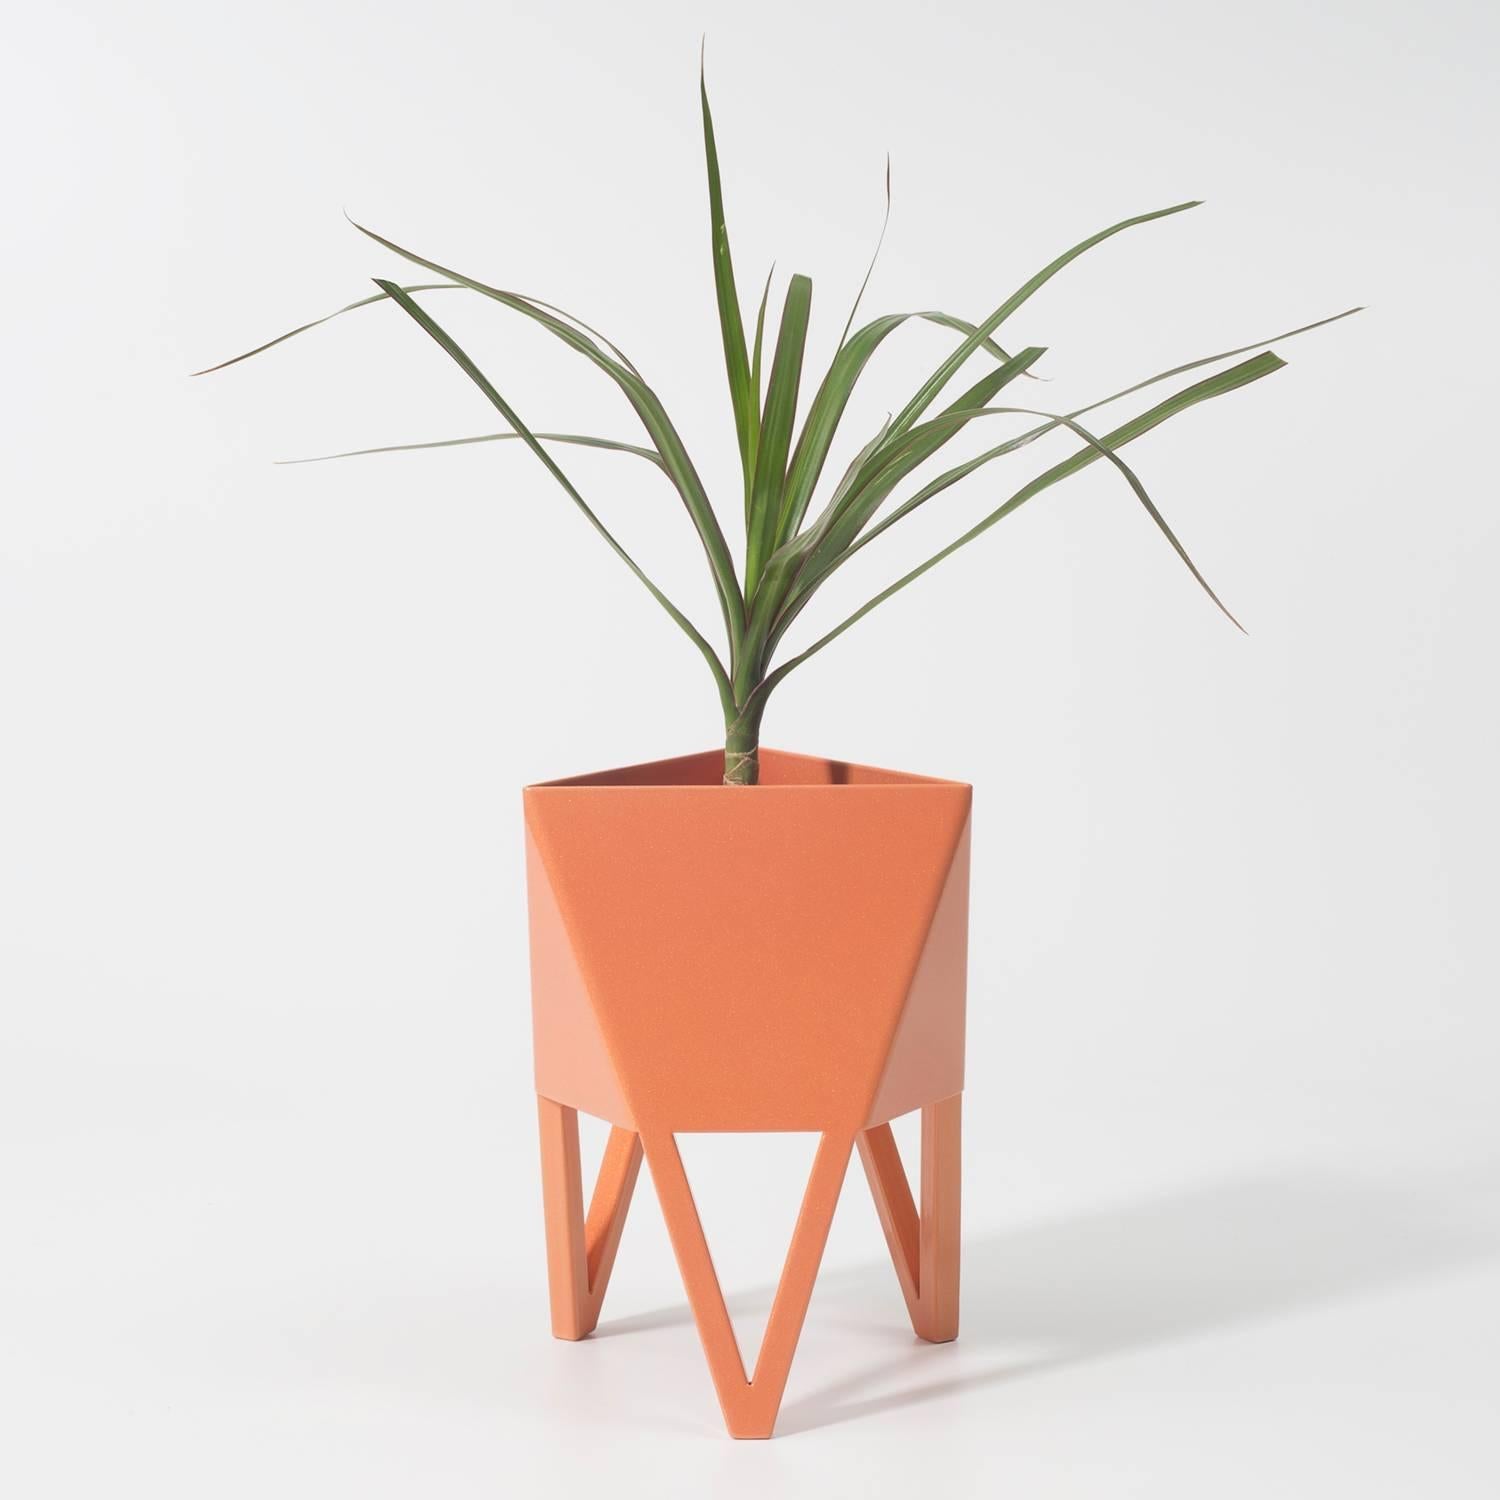 Small Deca Planter, Light Pink, Steel, Modern, Geometric by Force/Collide 9